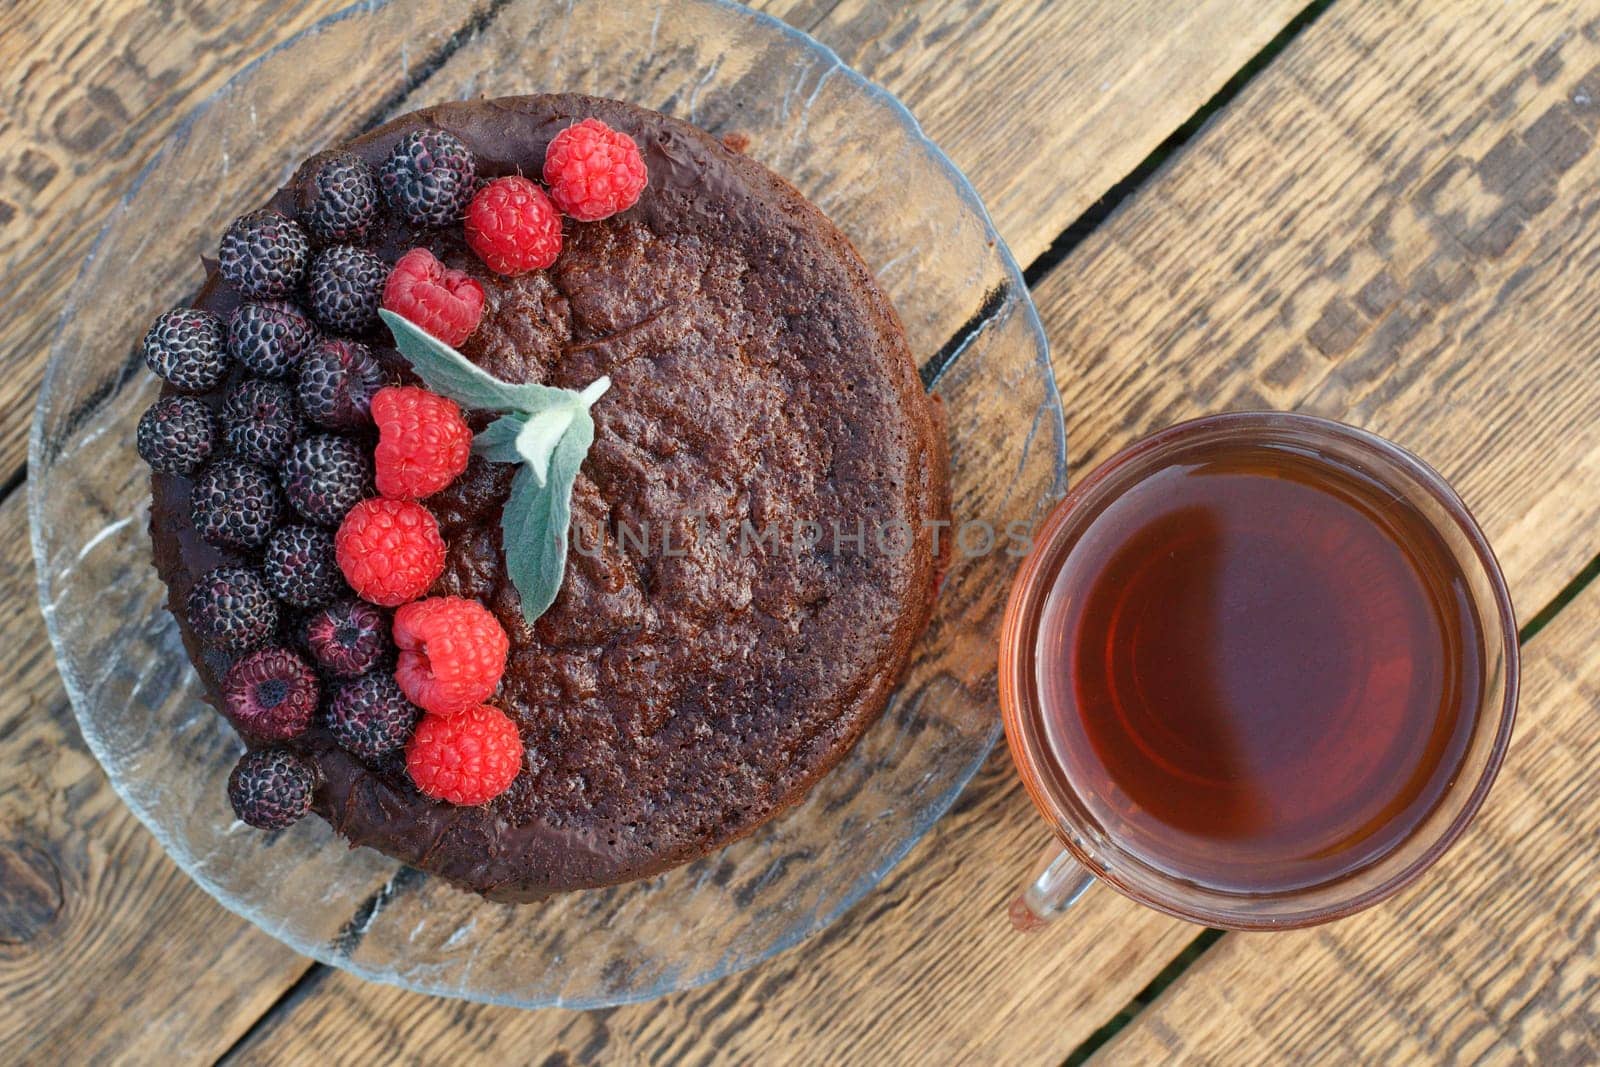 Homemade chocolate cake decorated with black and red raspberries on glass plate with cup of tea. by mvg6894